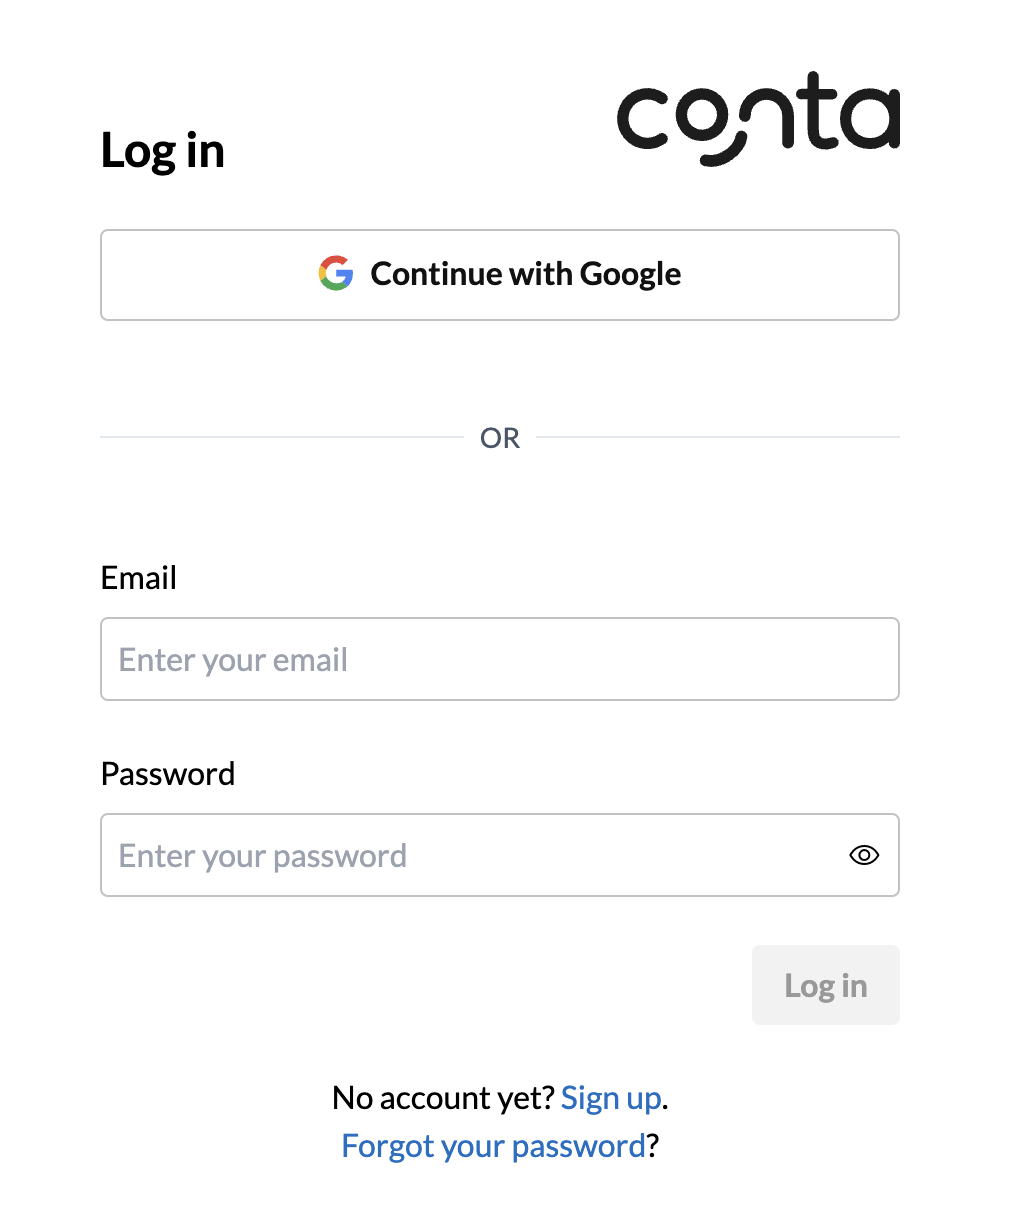 The Conta login page, where you can continue with Google, or enter your email or password. There is also a link to register or to reset password.